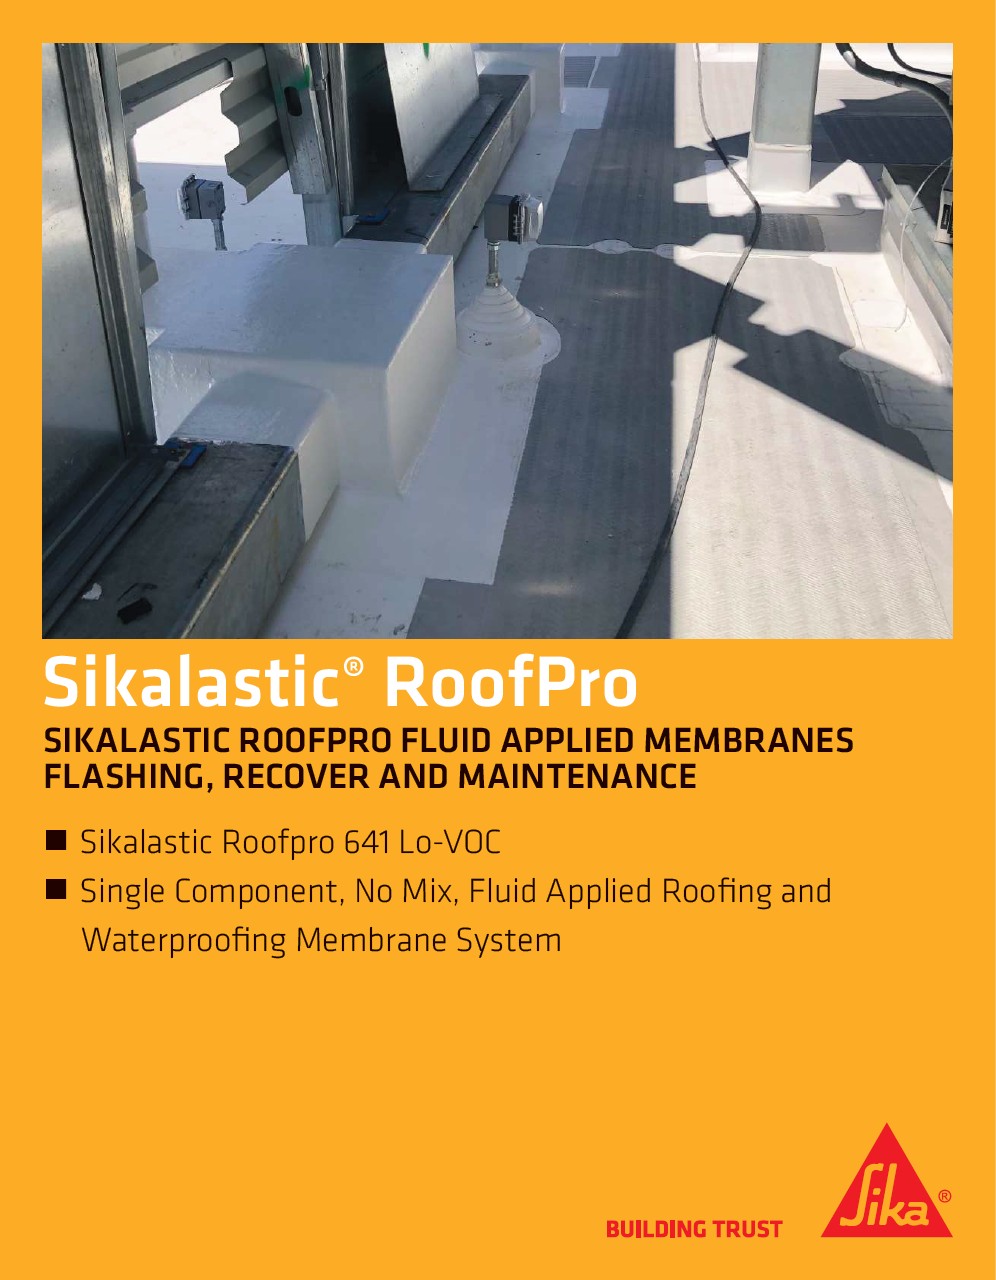 Sikalastic RoofPro Fluid Applied Membranes Flashing, Recover and Maintenance